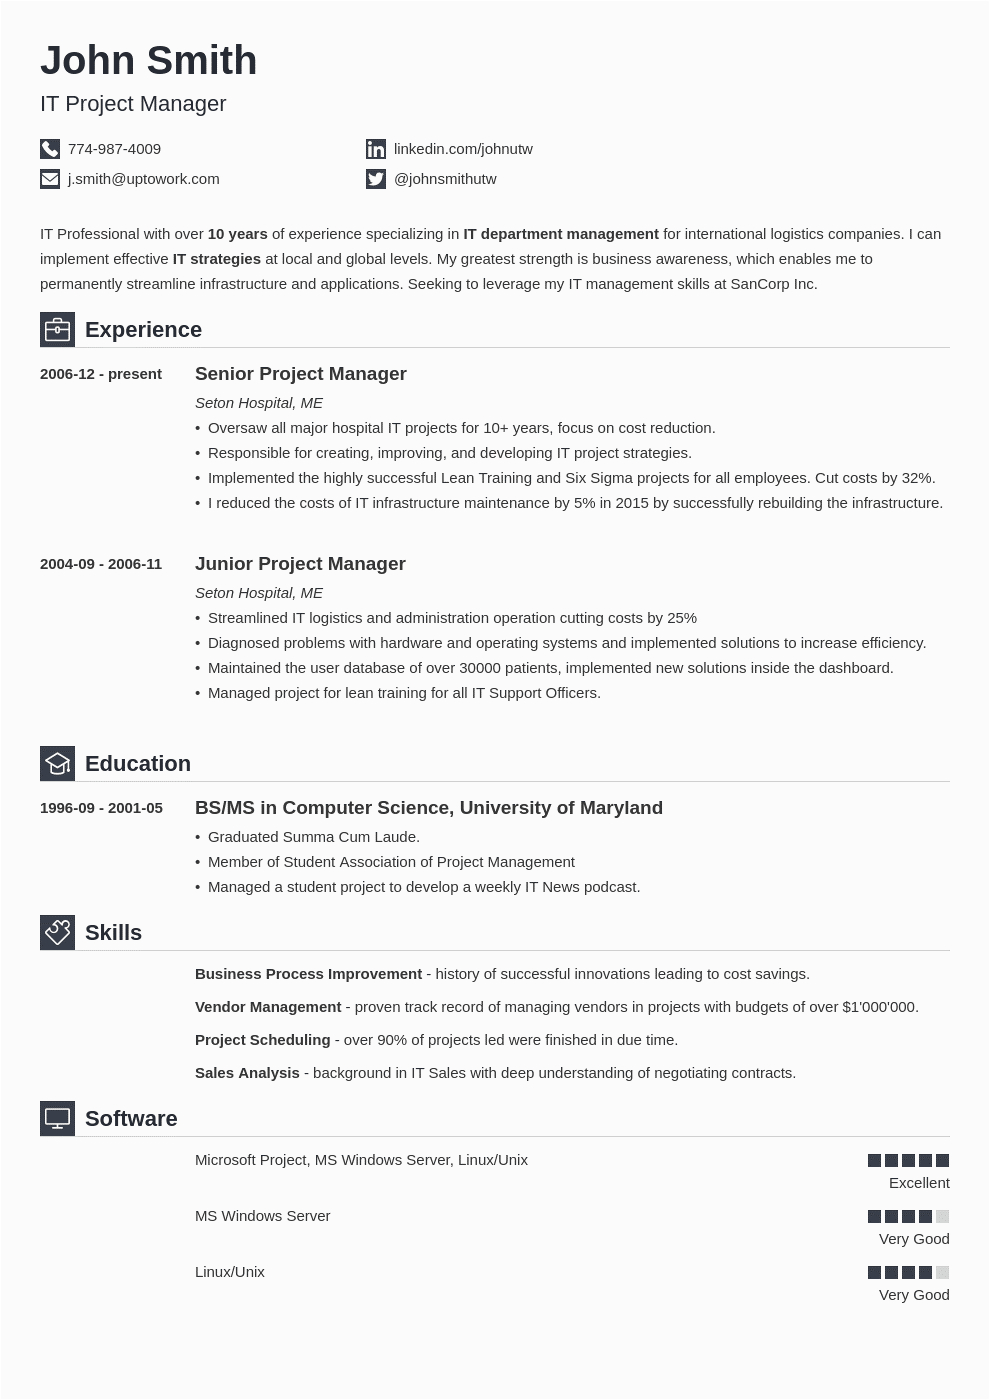 Resume Templates Free Download for Experienced Professionals Simple Resume Templates [16 Basic formats to Download]